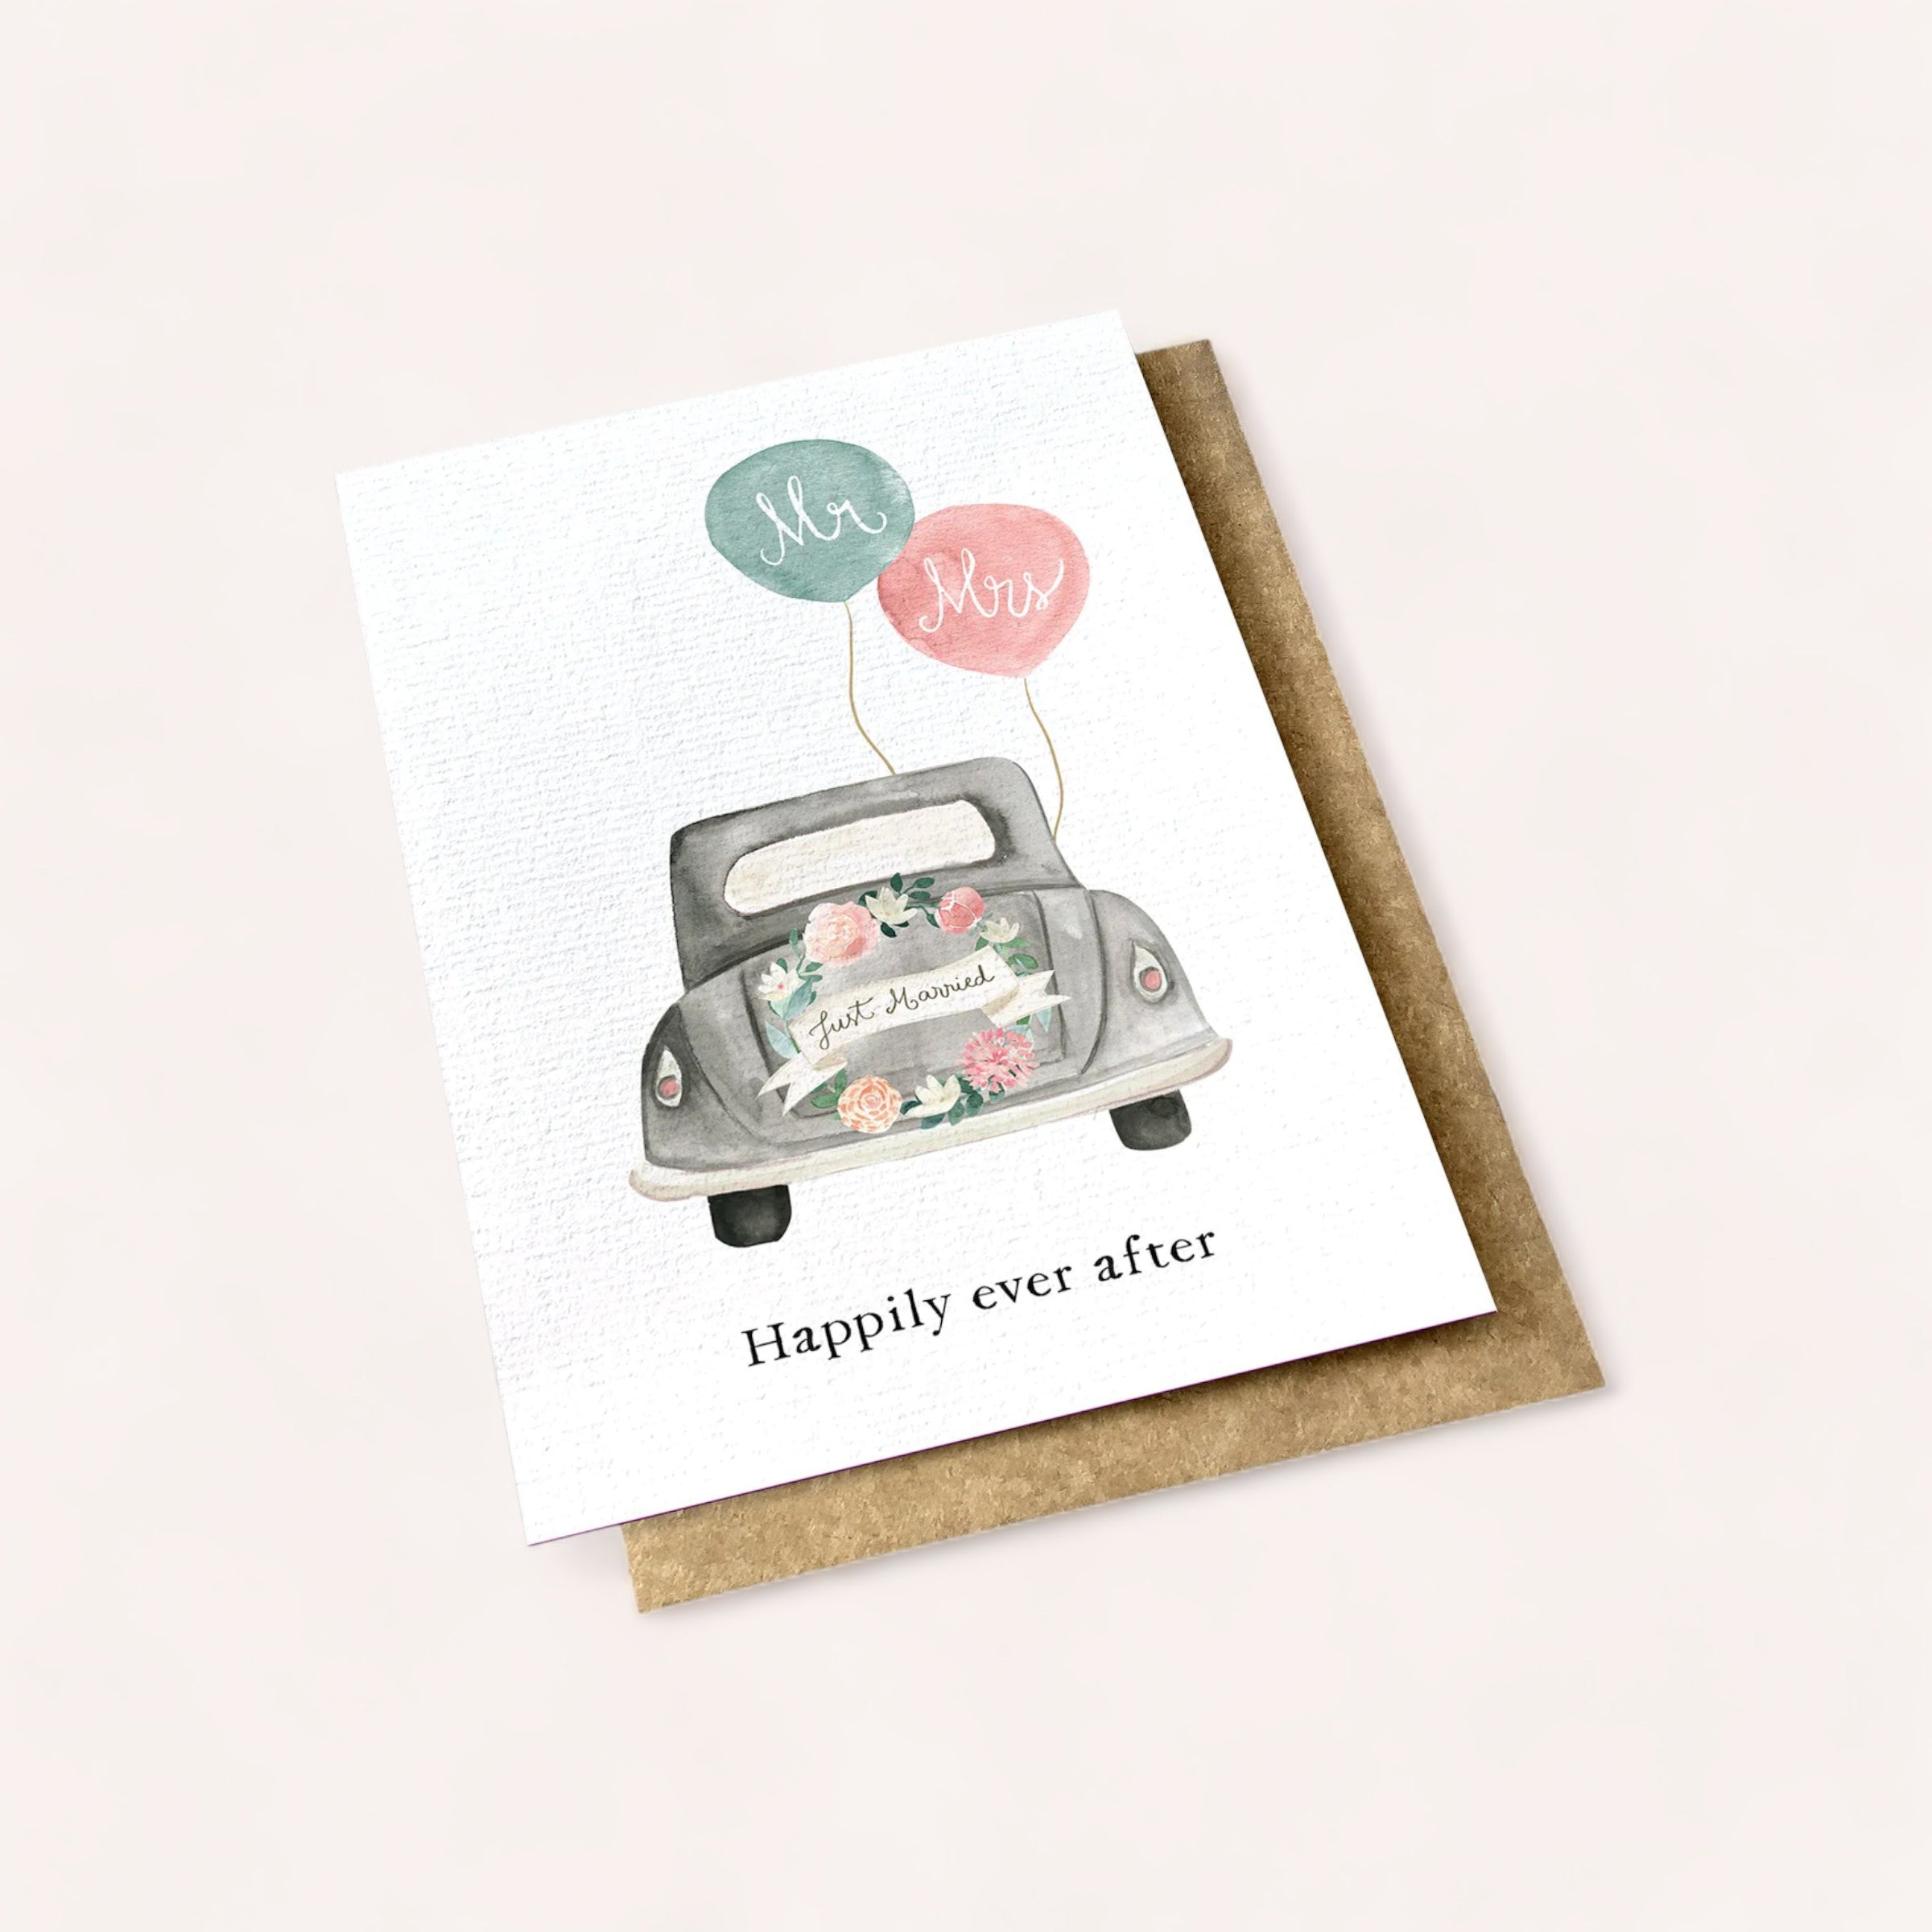 A charming Happily Ever After card by Ink Bomb featuring an illustration of a vintage car adorned with a floral arrangement and "just married" sign, complemented by "mr. & mrs." balloons above, and a sweet message